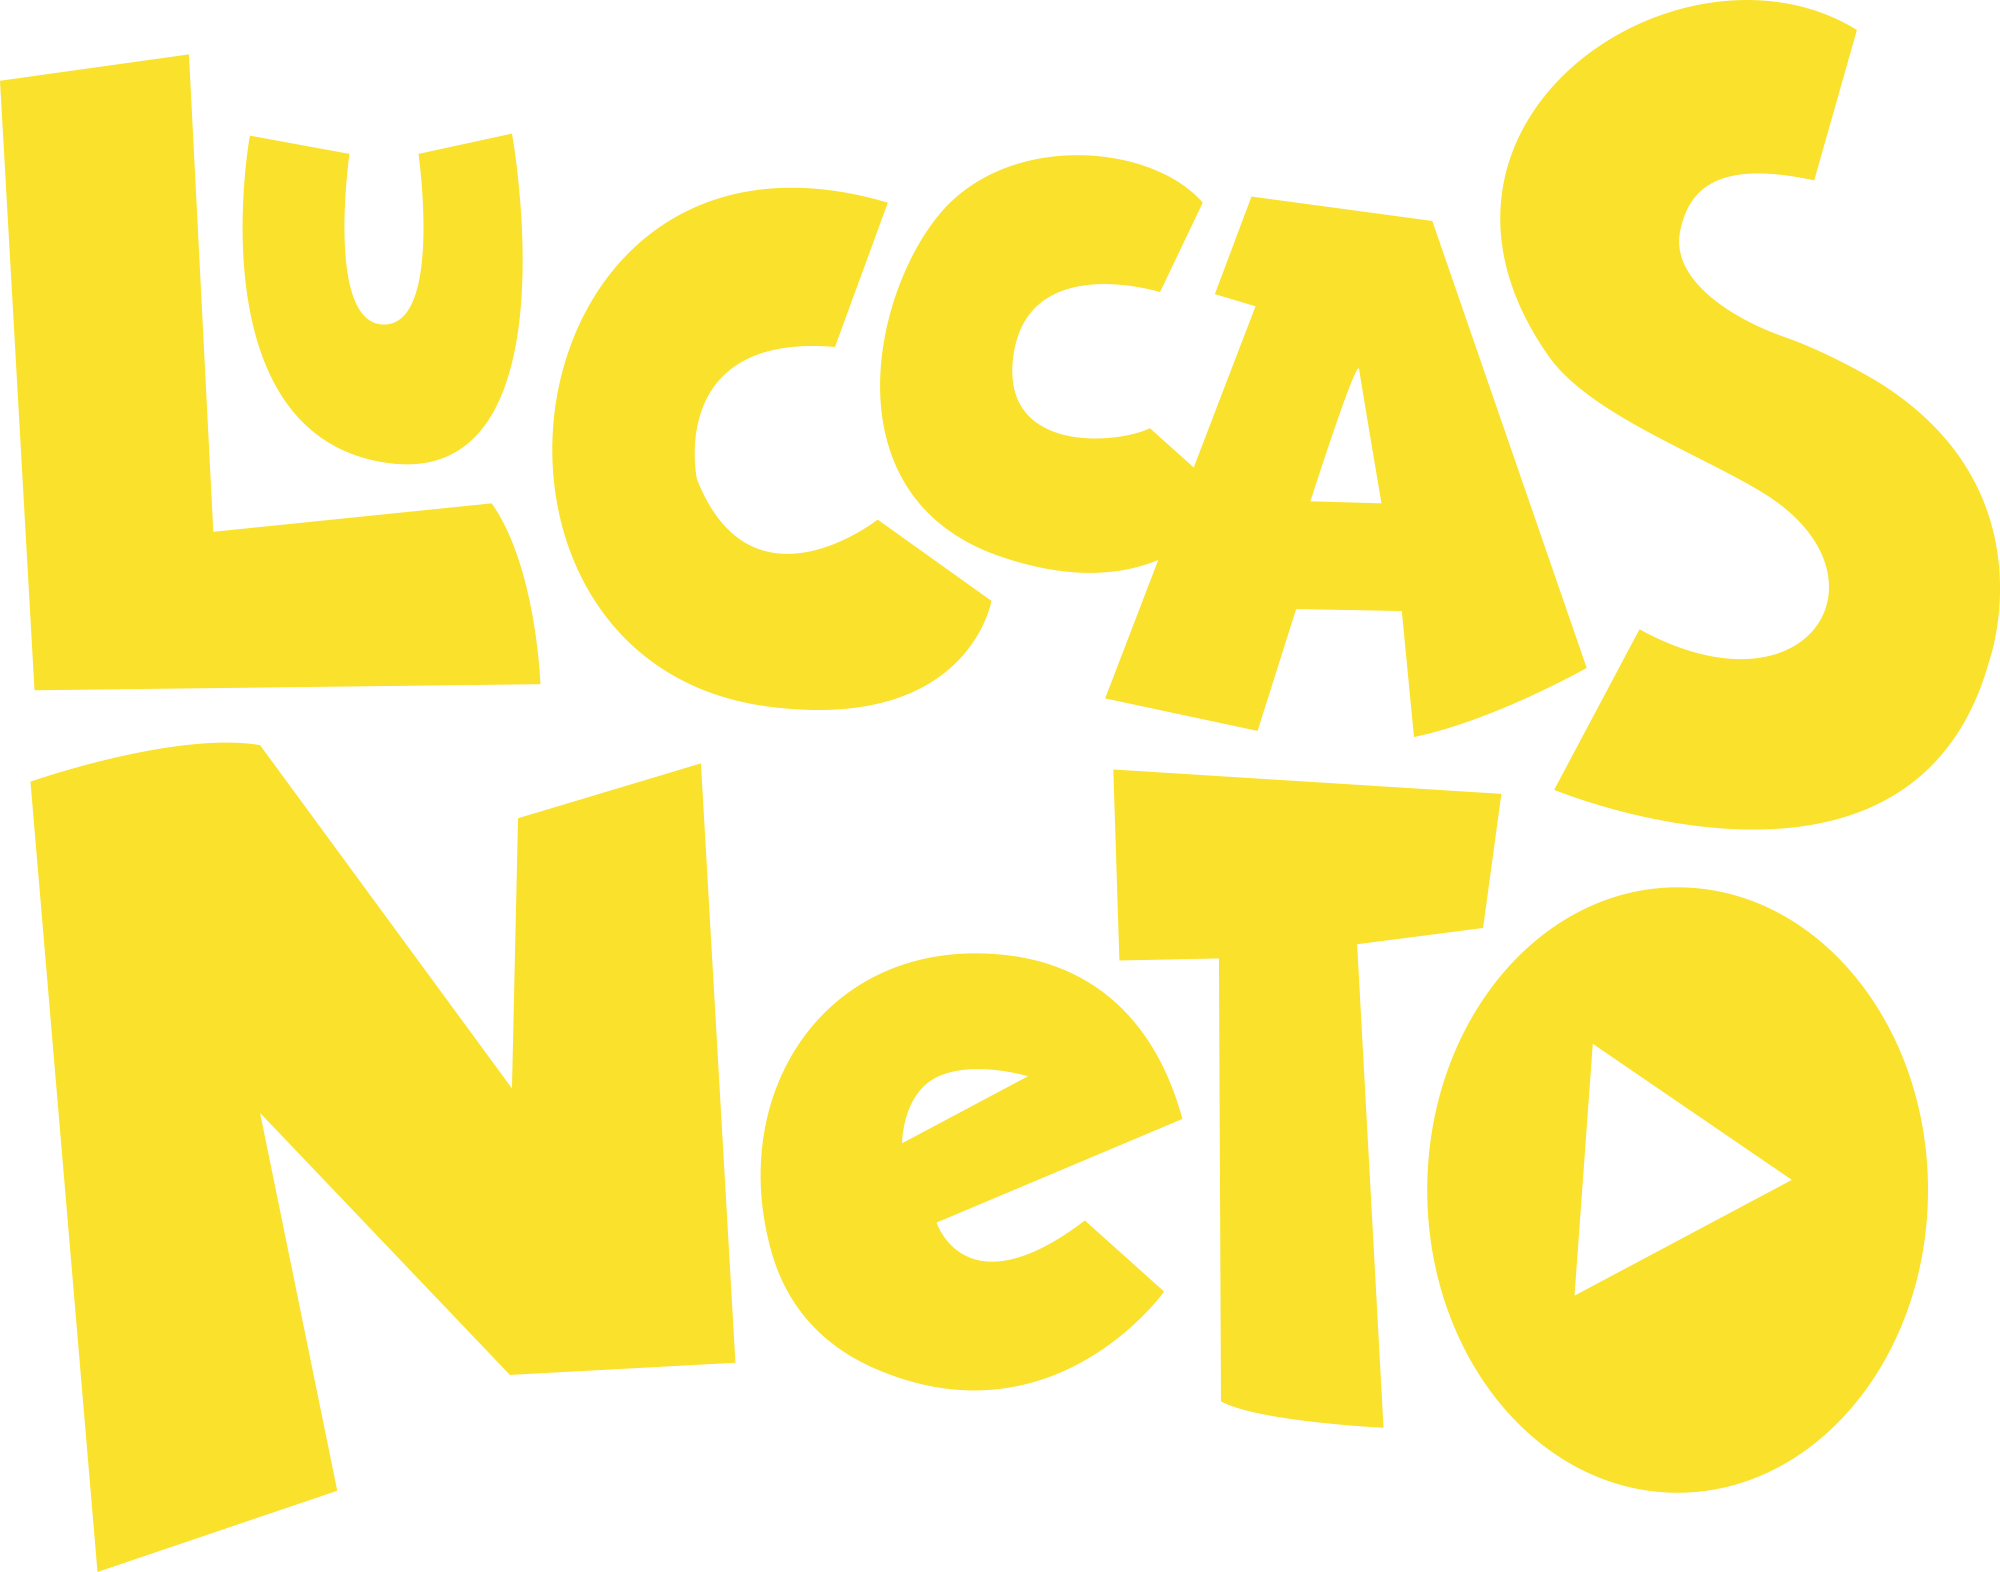 Luccas Neto – Logo Limpo PNG 01